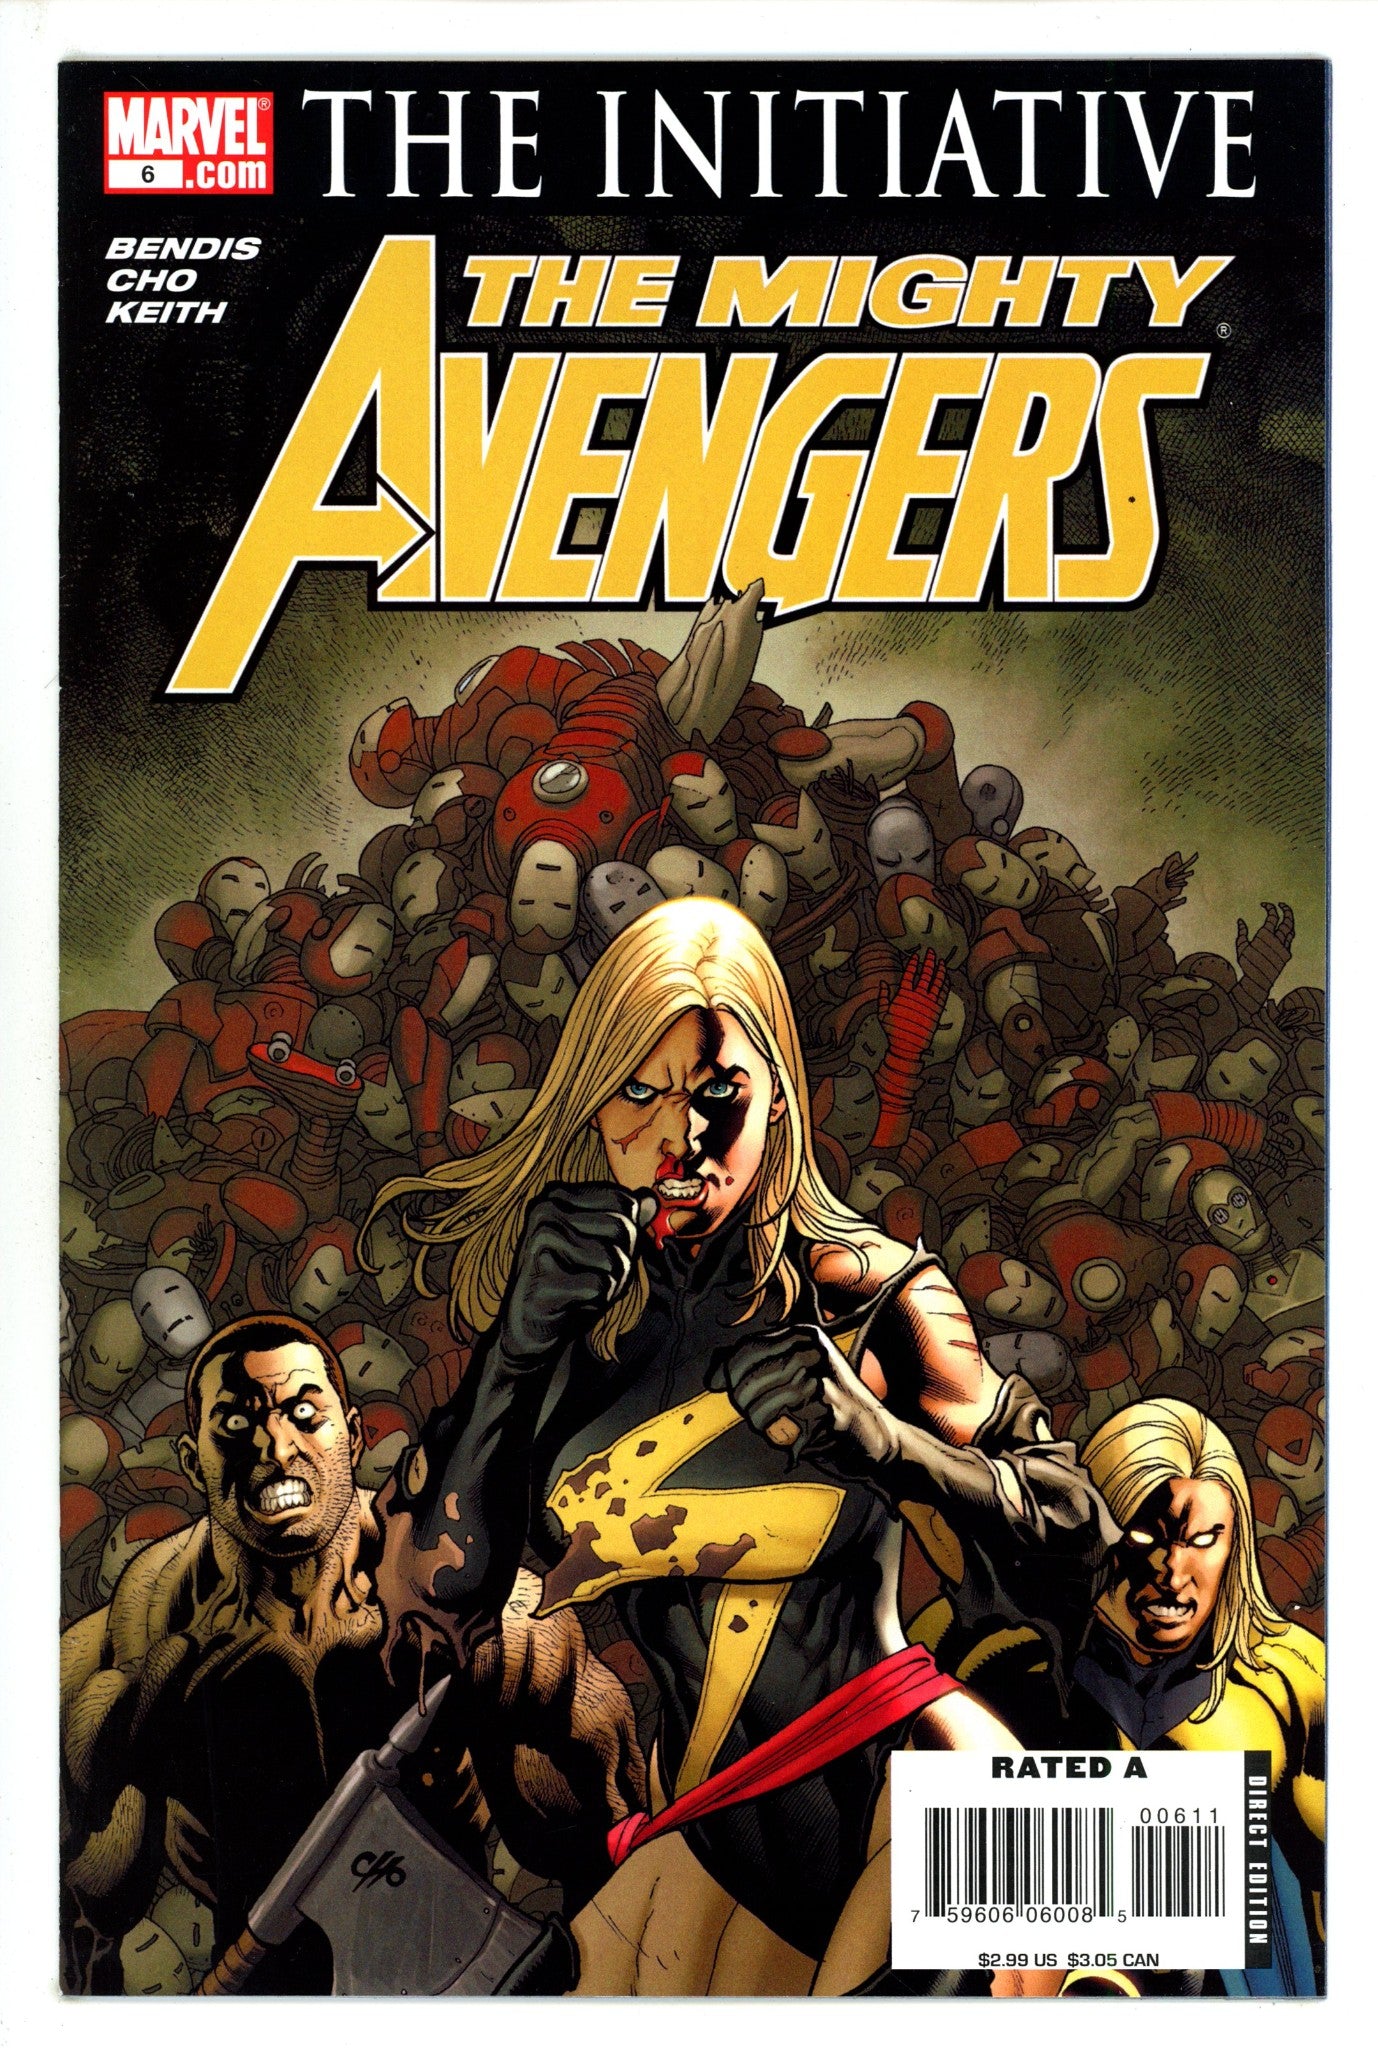 The Mighty Avengers Vol 1 6 High Grade (2007) 